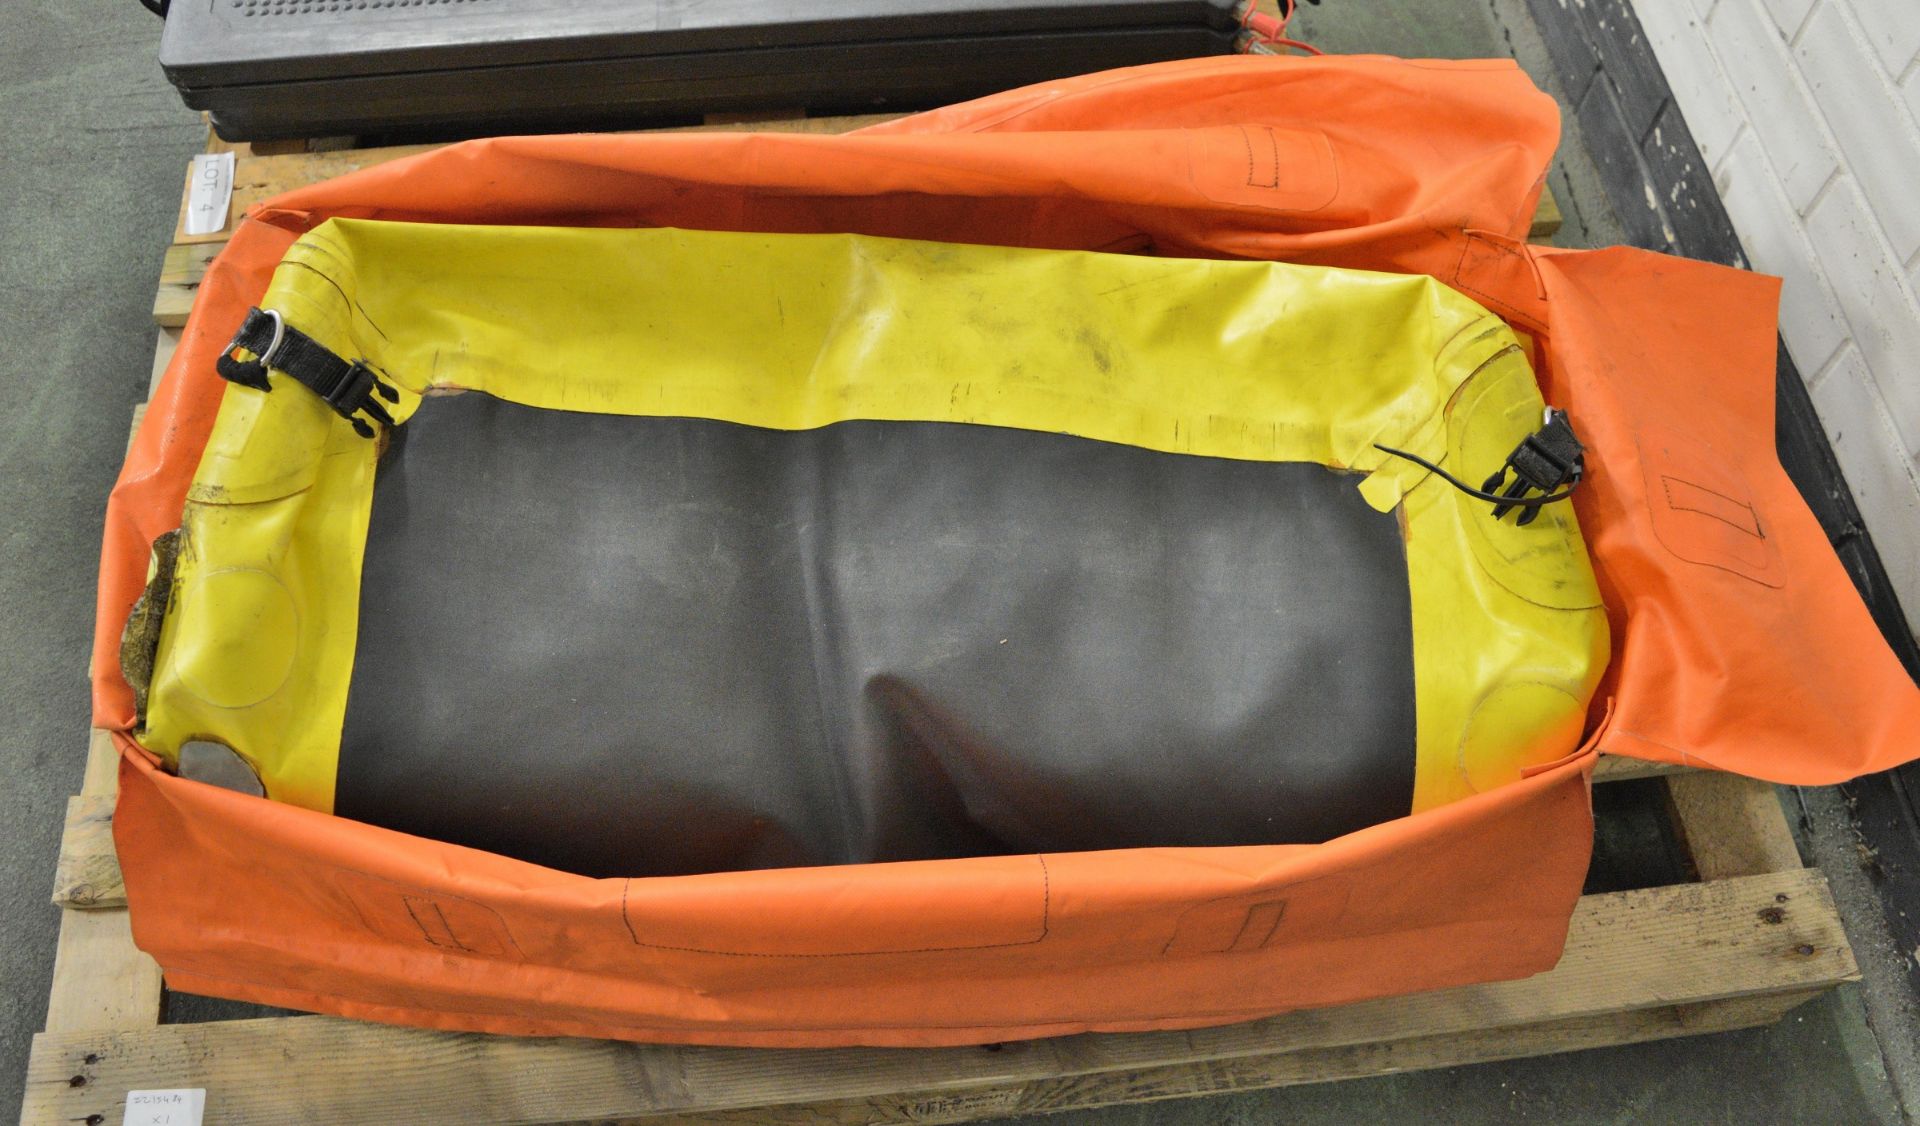 MFC Survival Inflatable Rescue Sled - Image 3 of 4